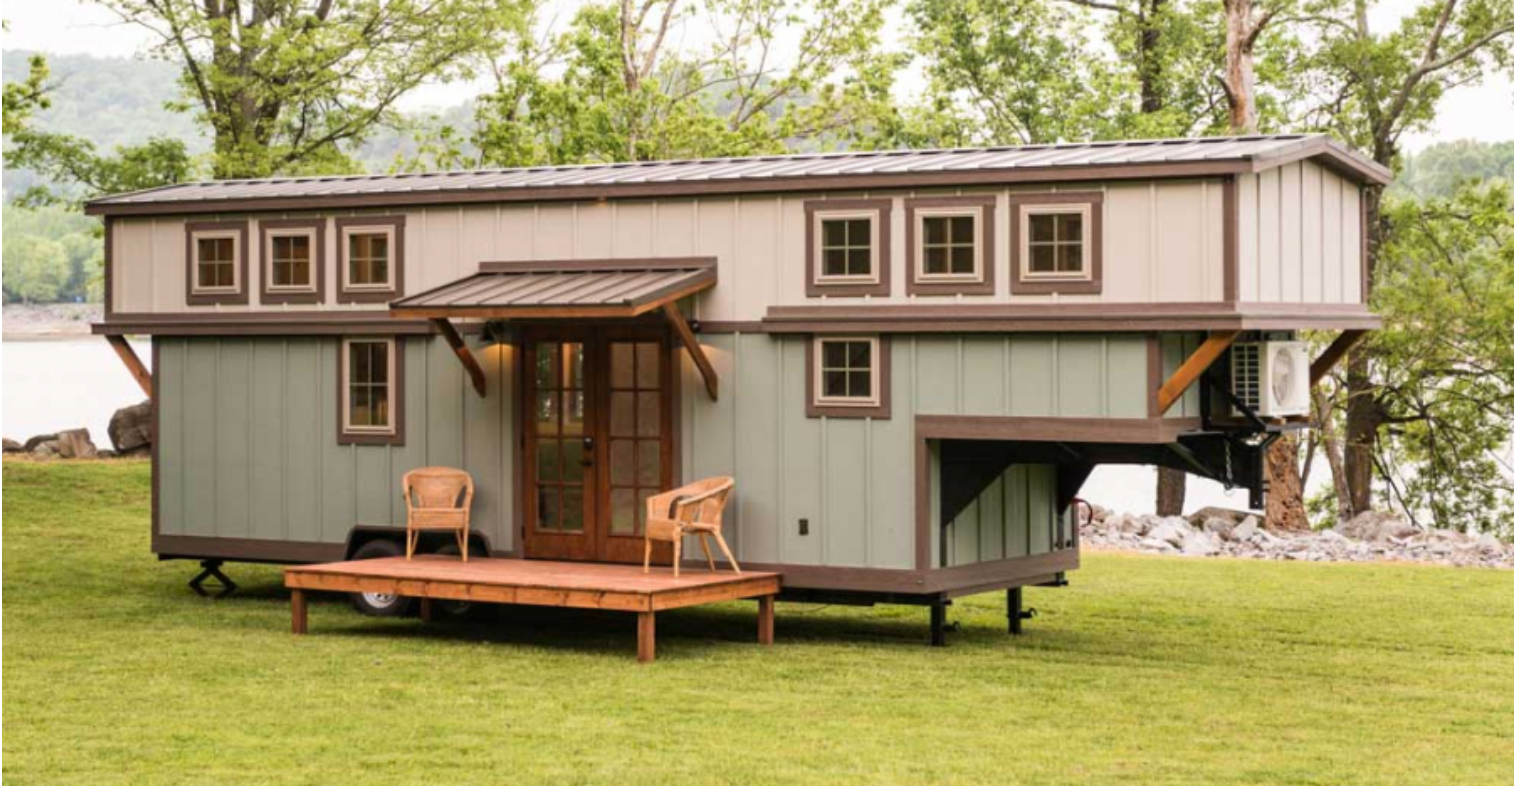 The Retreat Is A Super Sized Tiny House On Wheels That’s Great For A Family